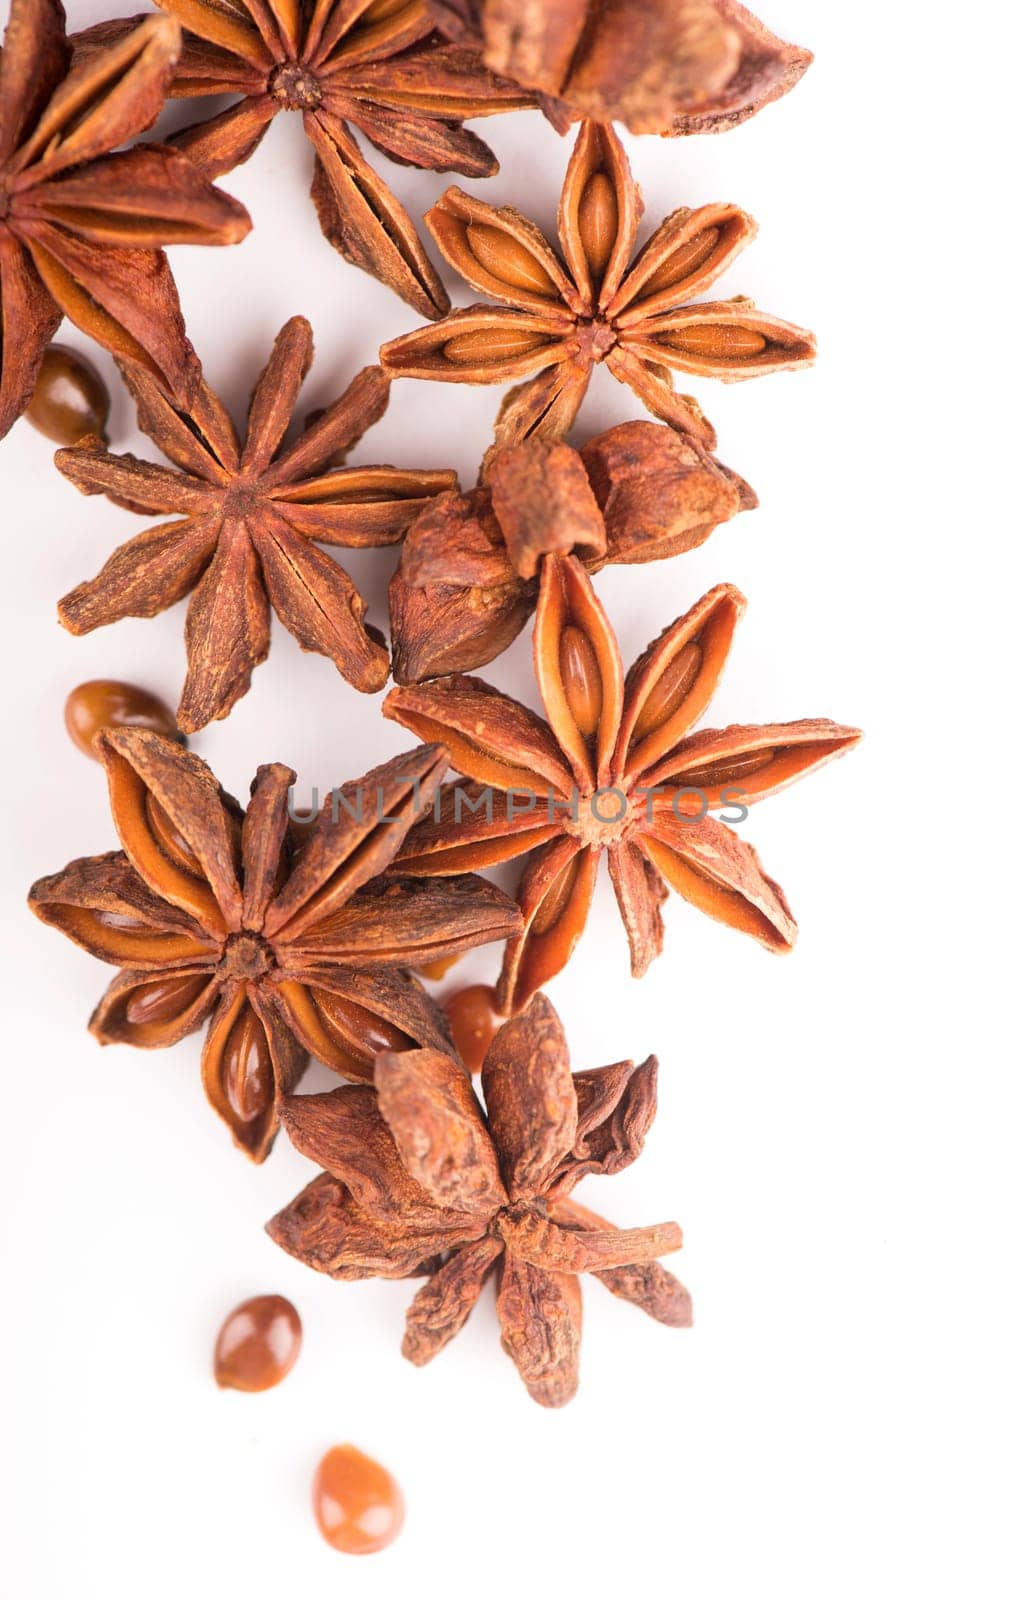 Whole Star Anise isolated on white background by aprilphoto